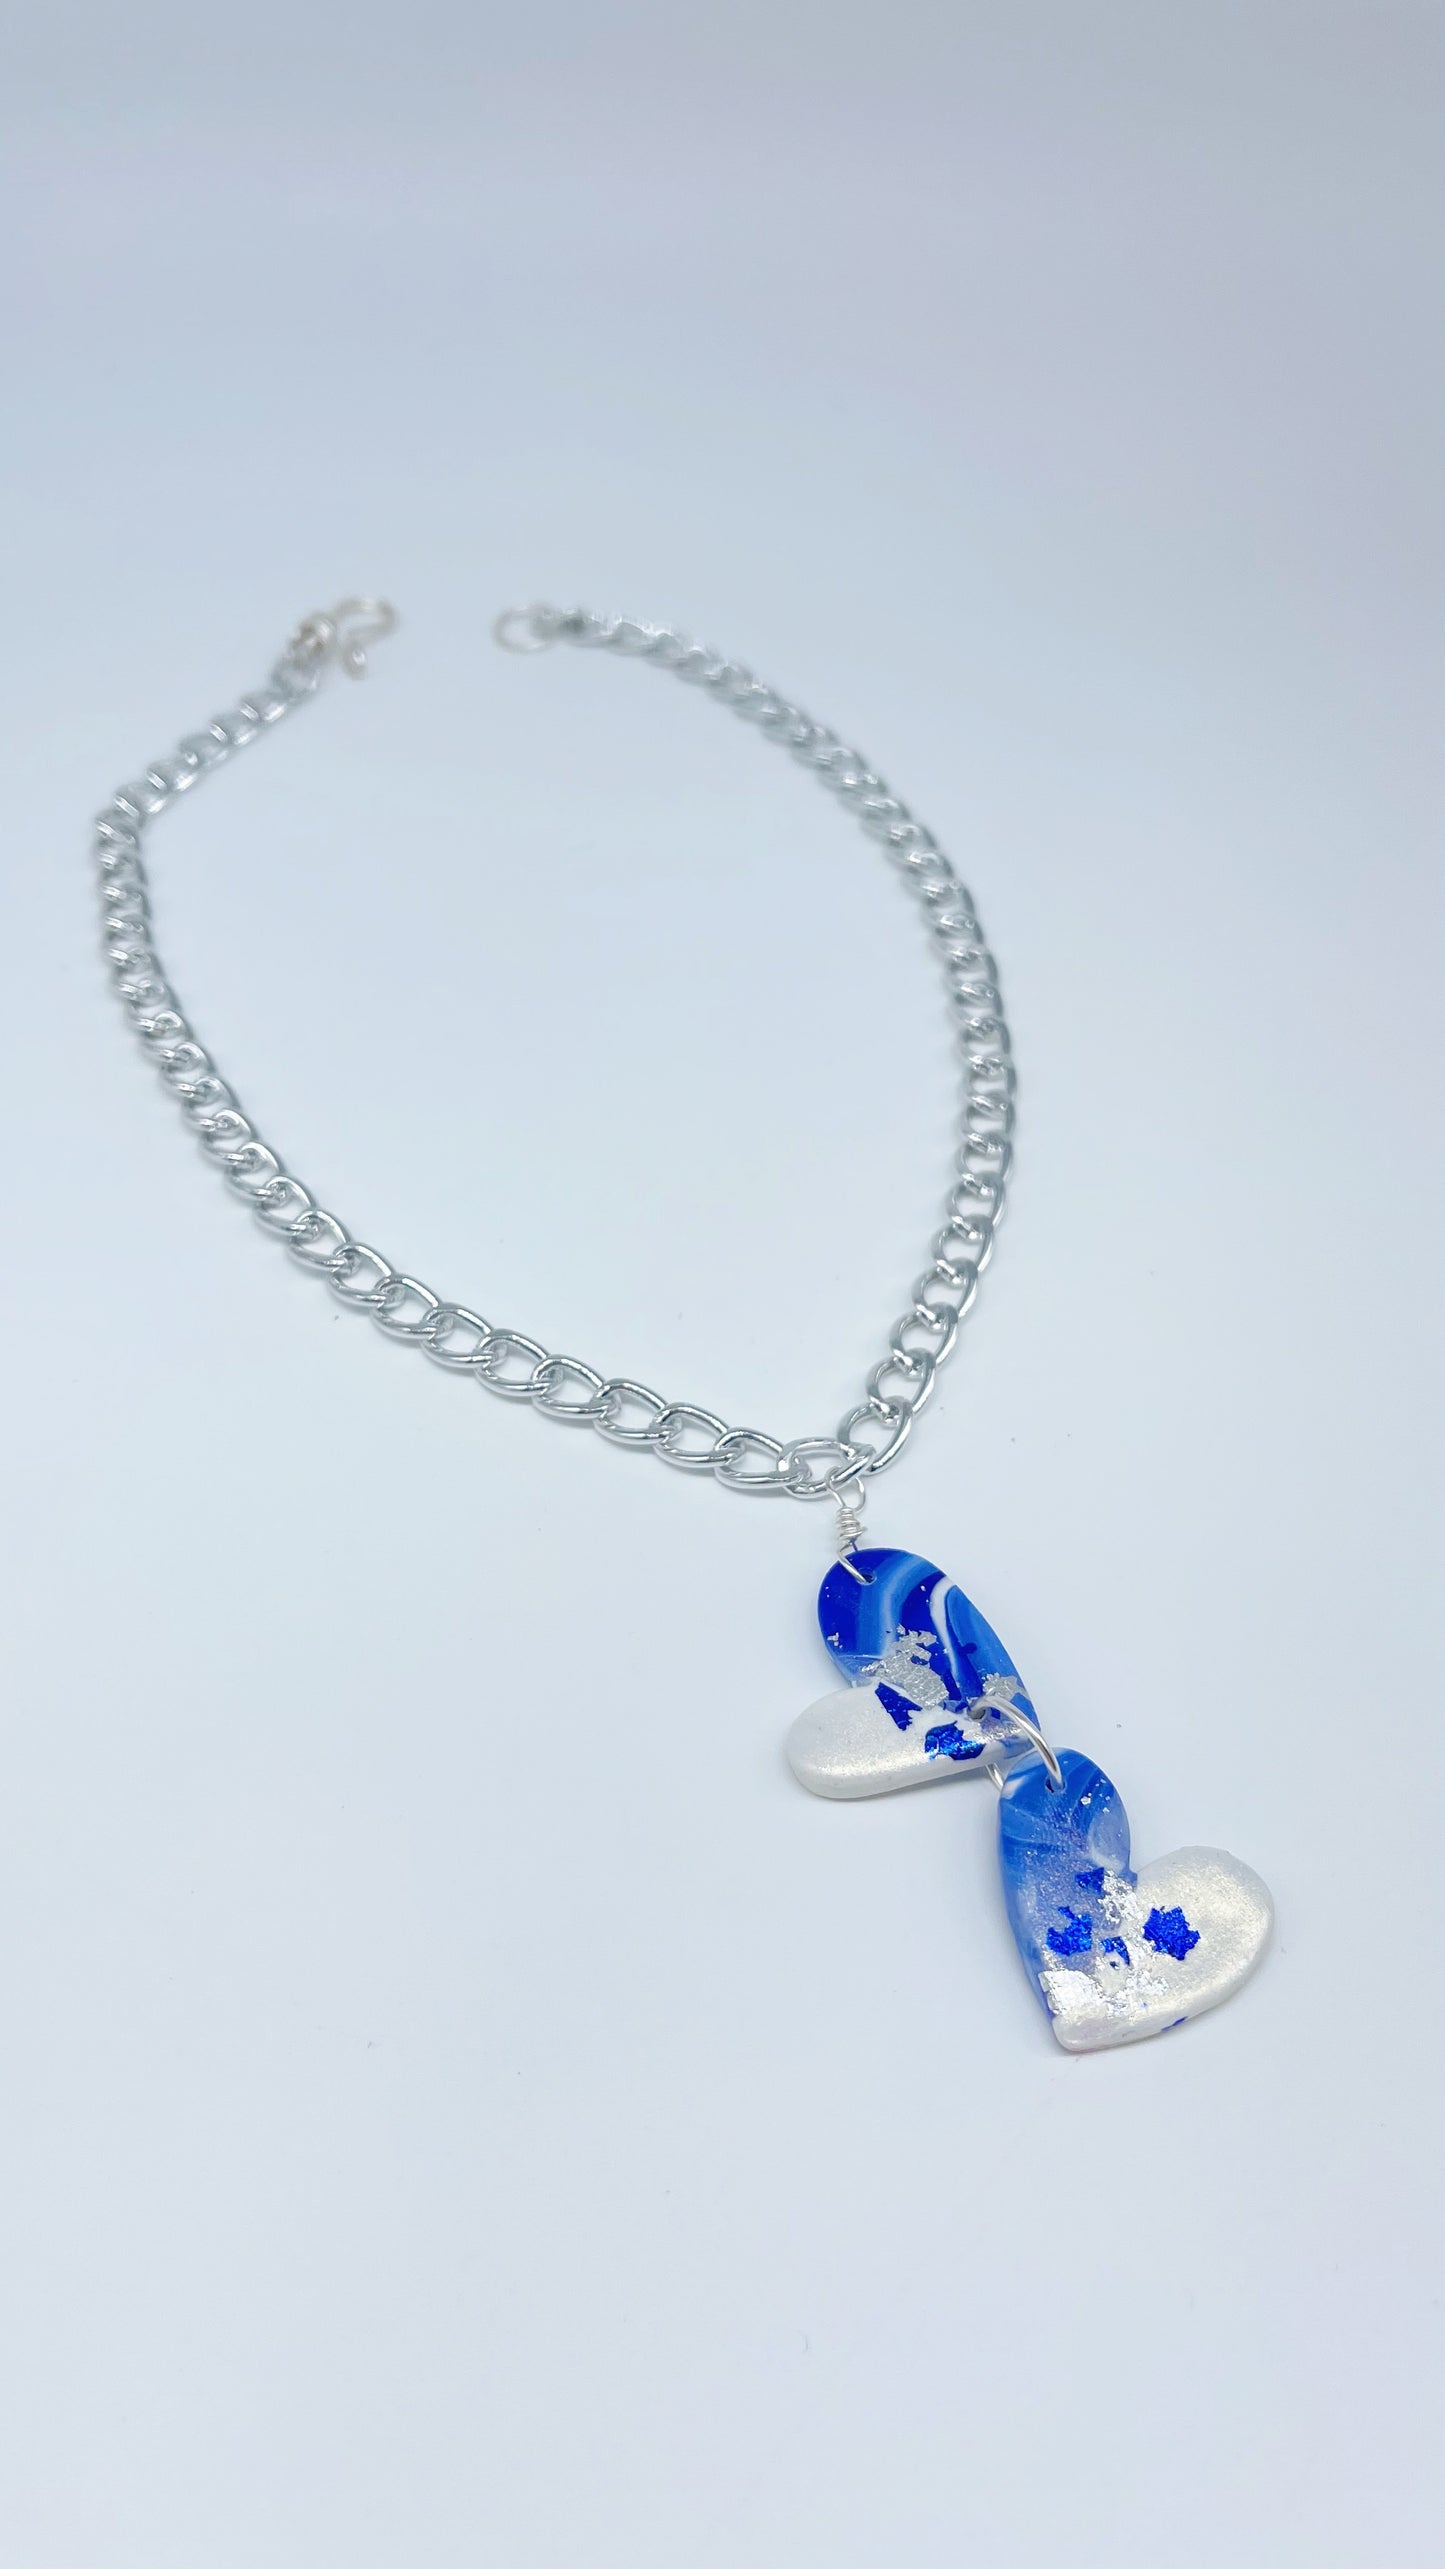 Two Blue Hearts Necklace $29